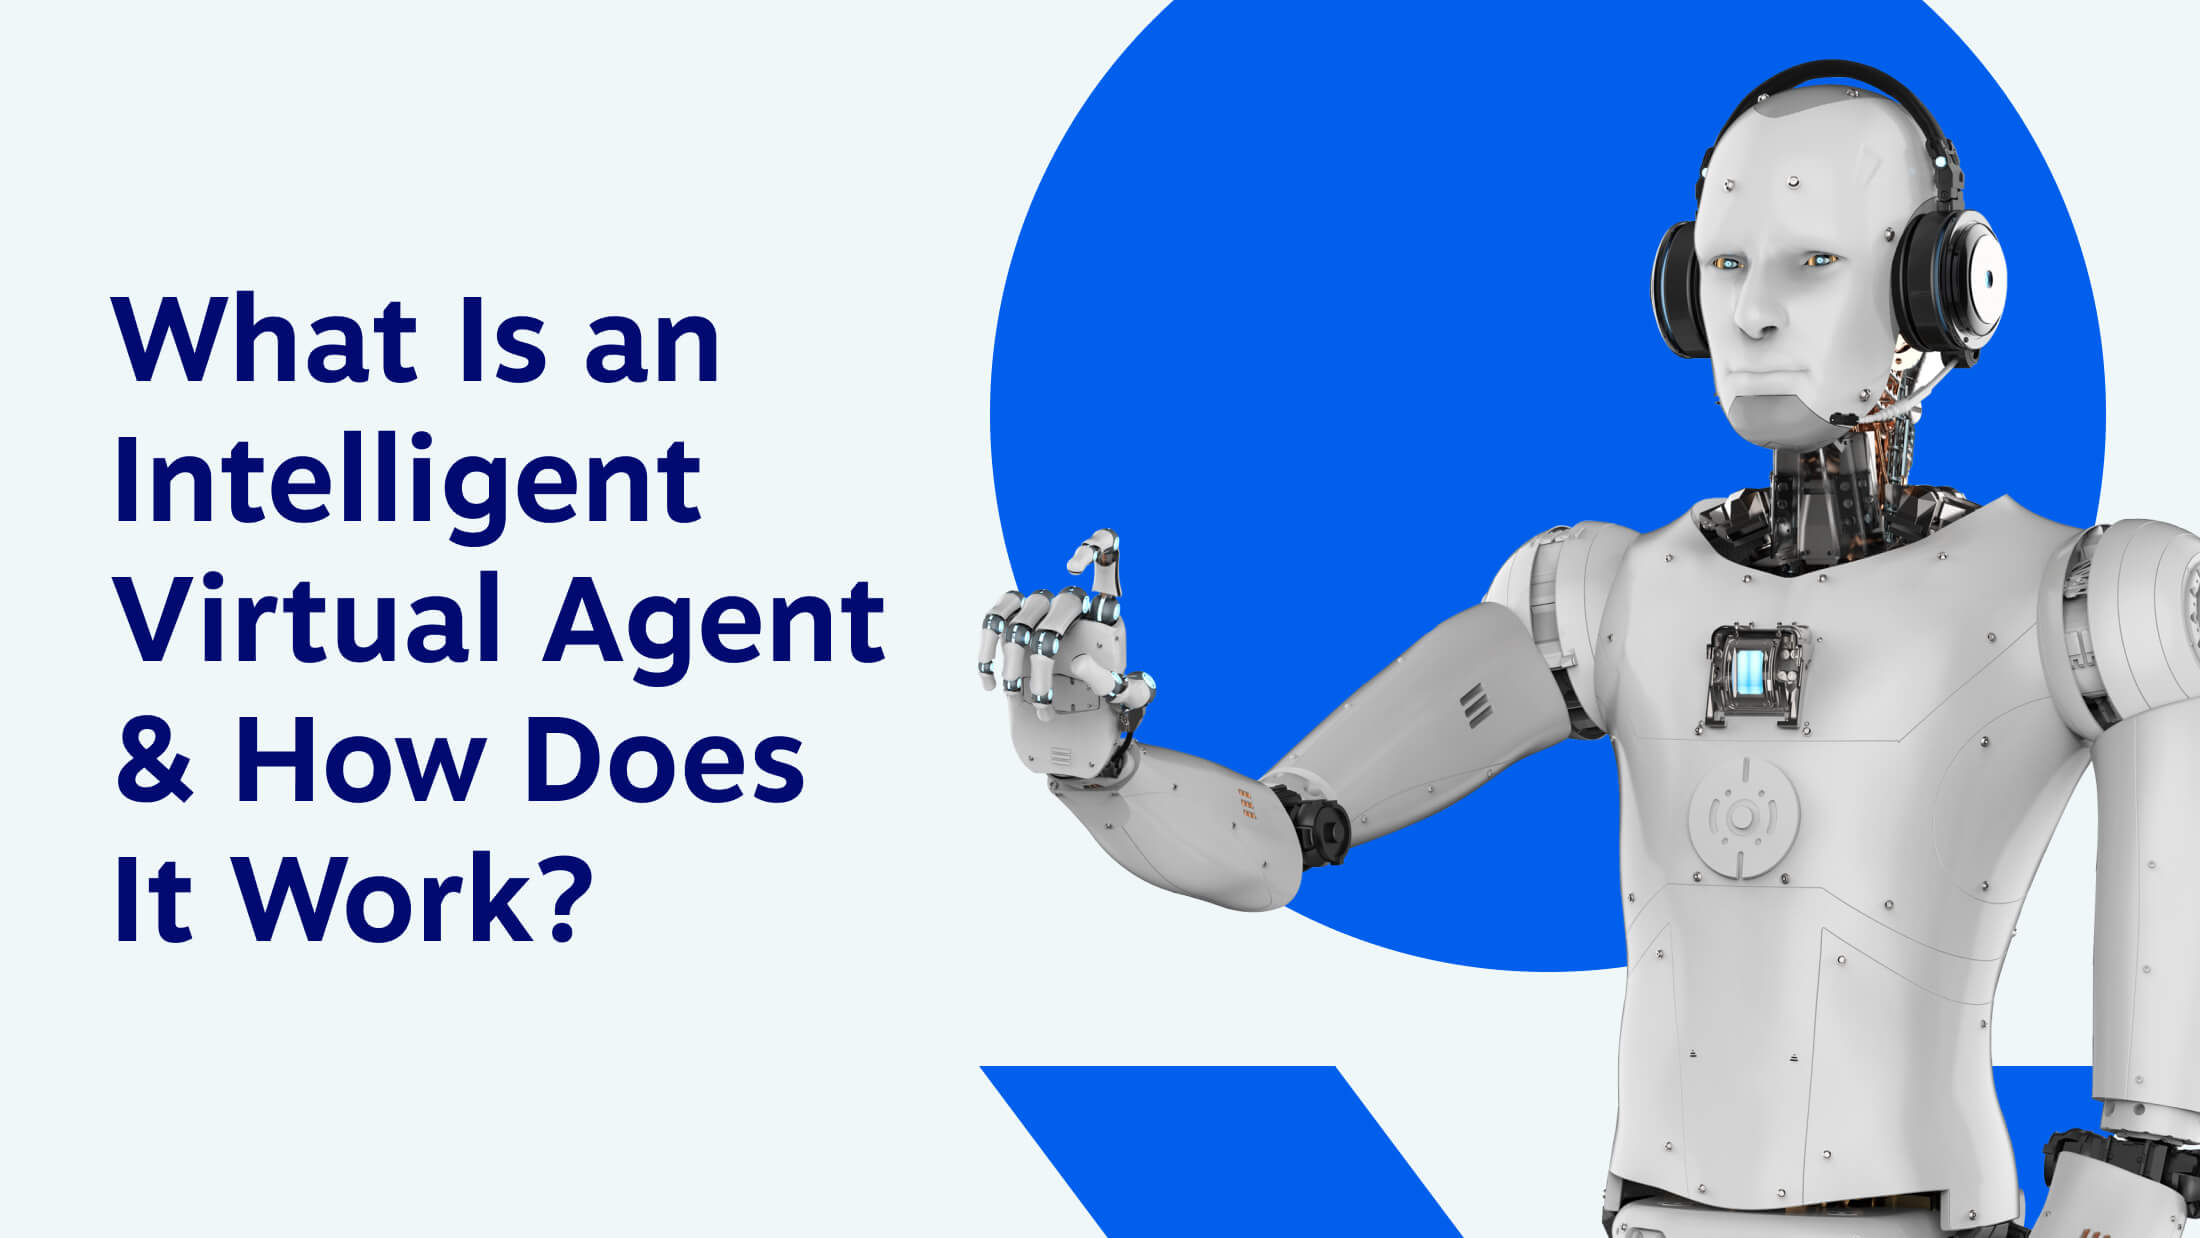 What Is an Intelligent Virtual Agent & How Does It Work?